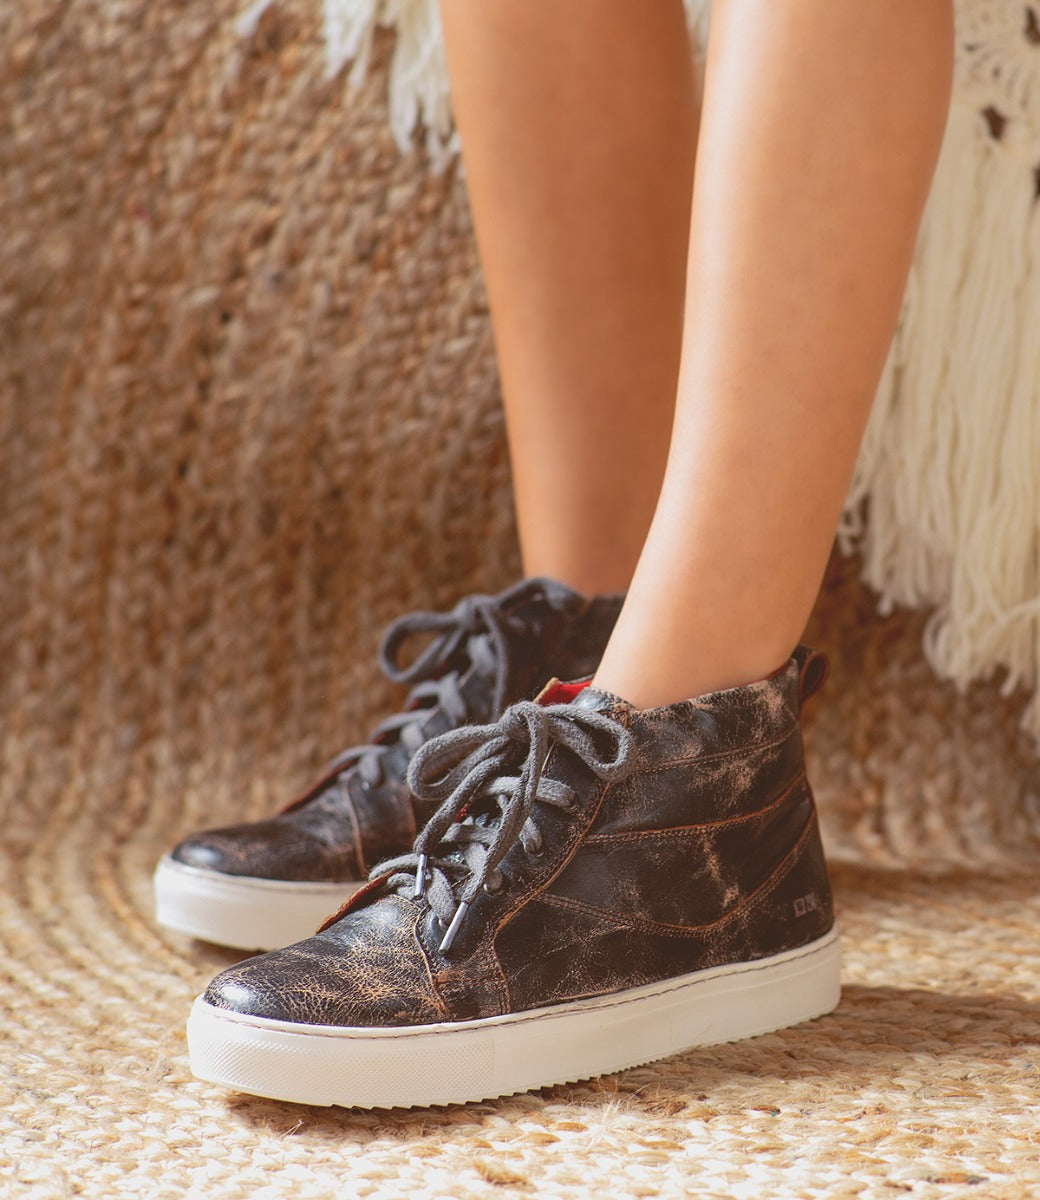 A woman wearing a pair of Bed Stu Rossela sneakers on a rug.